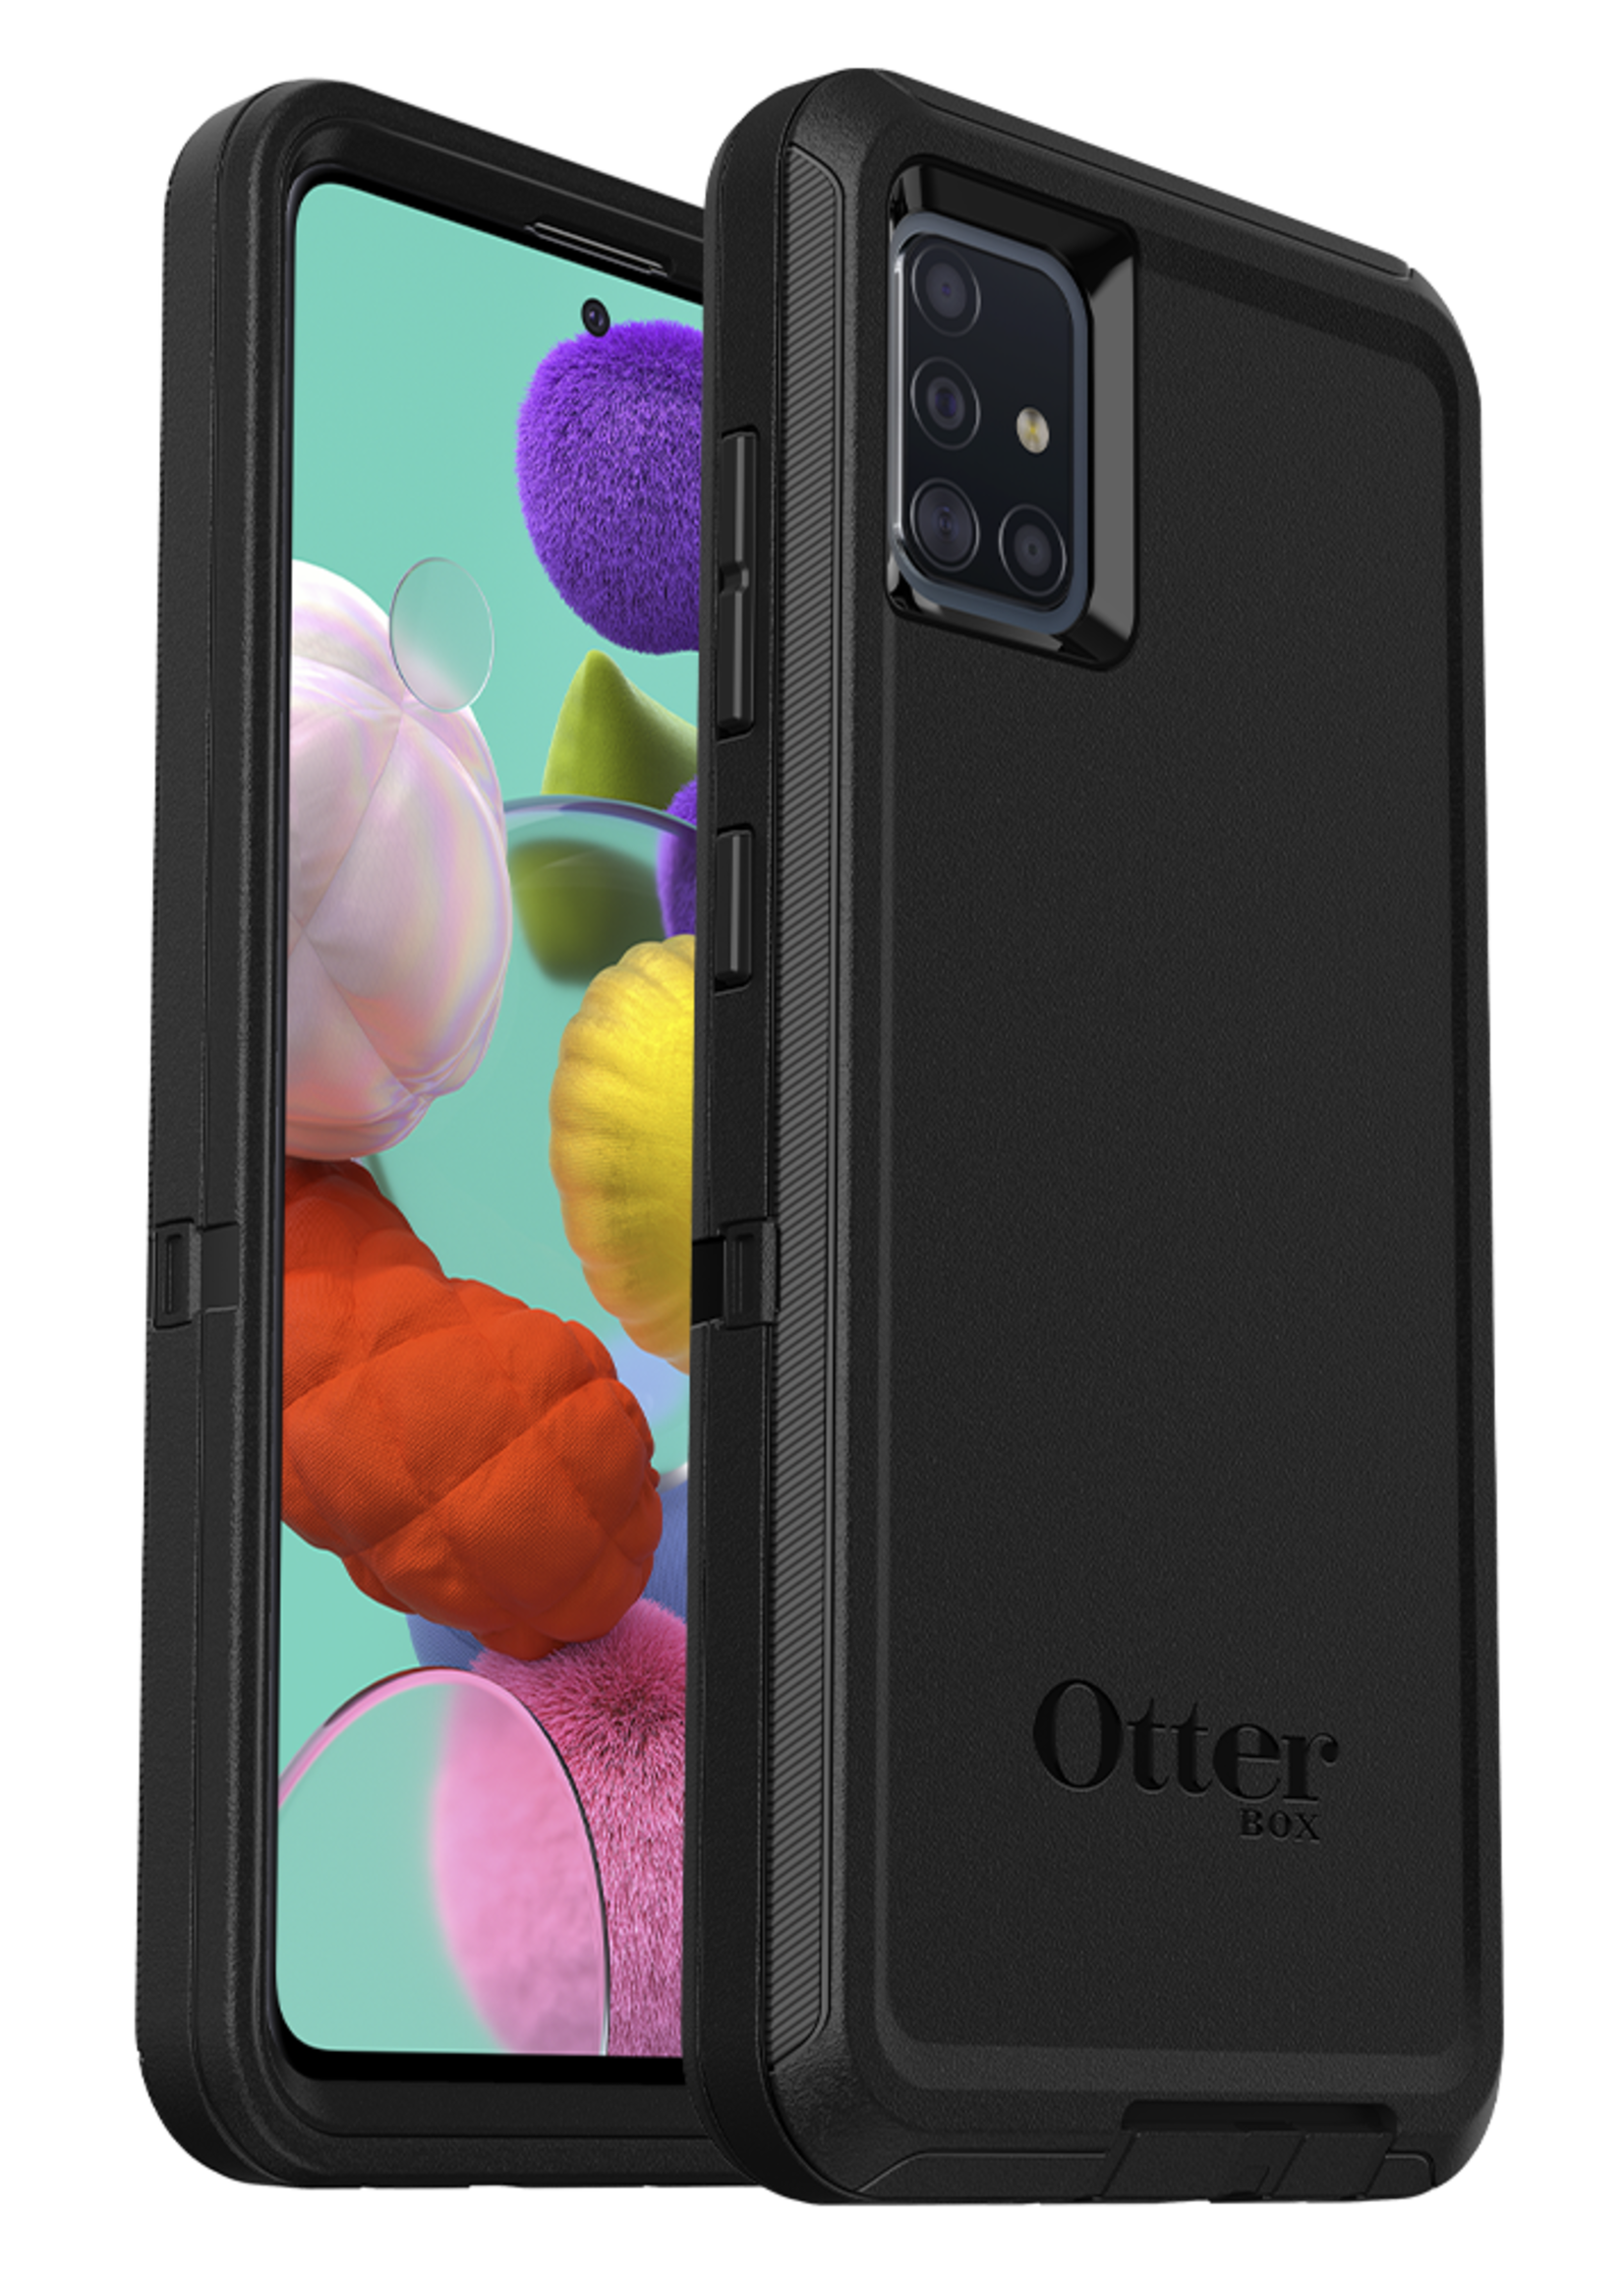 Otterbox OtterBox - Defender Case for Samsung Galaxy A51 - Black